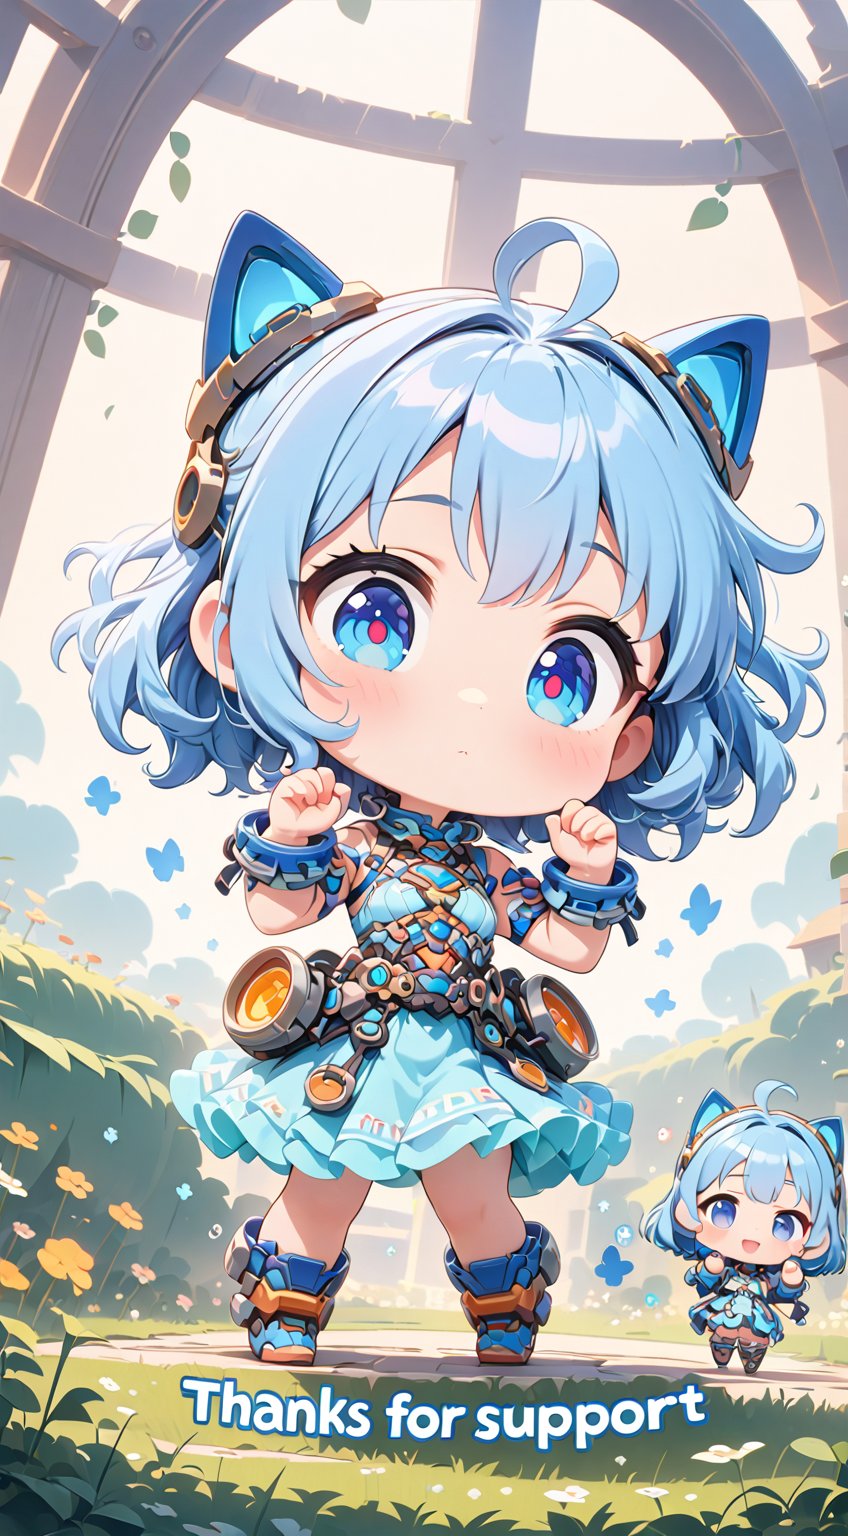 ((anime chibi style)), masterpiece, highly detailed, 16K, HD, cute with adorable eyes in the garden, dynamic angle, hands up, 1girl, long blue hair, blue eyes, simplecats, as decorative text as 5K Thanks for Support hover above, accompanied by the title, 1 girl,Text,chibi,cutechibiprofile